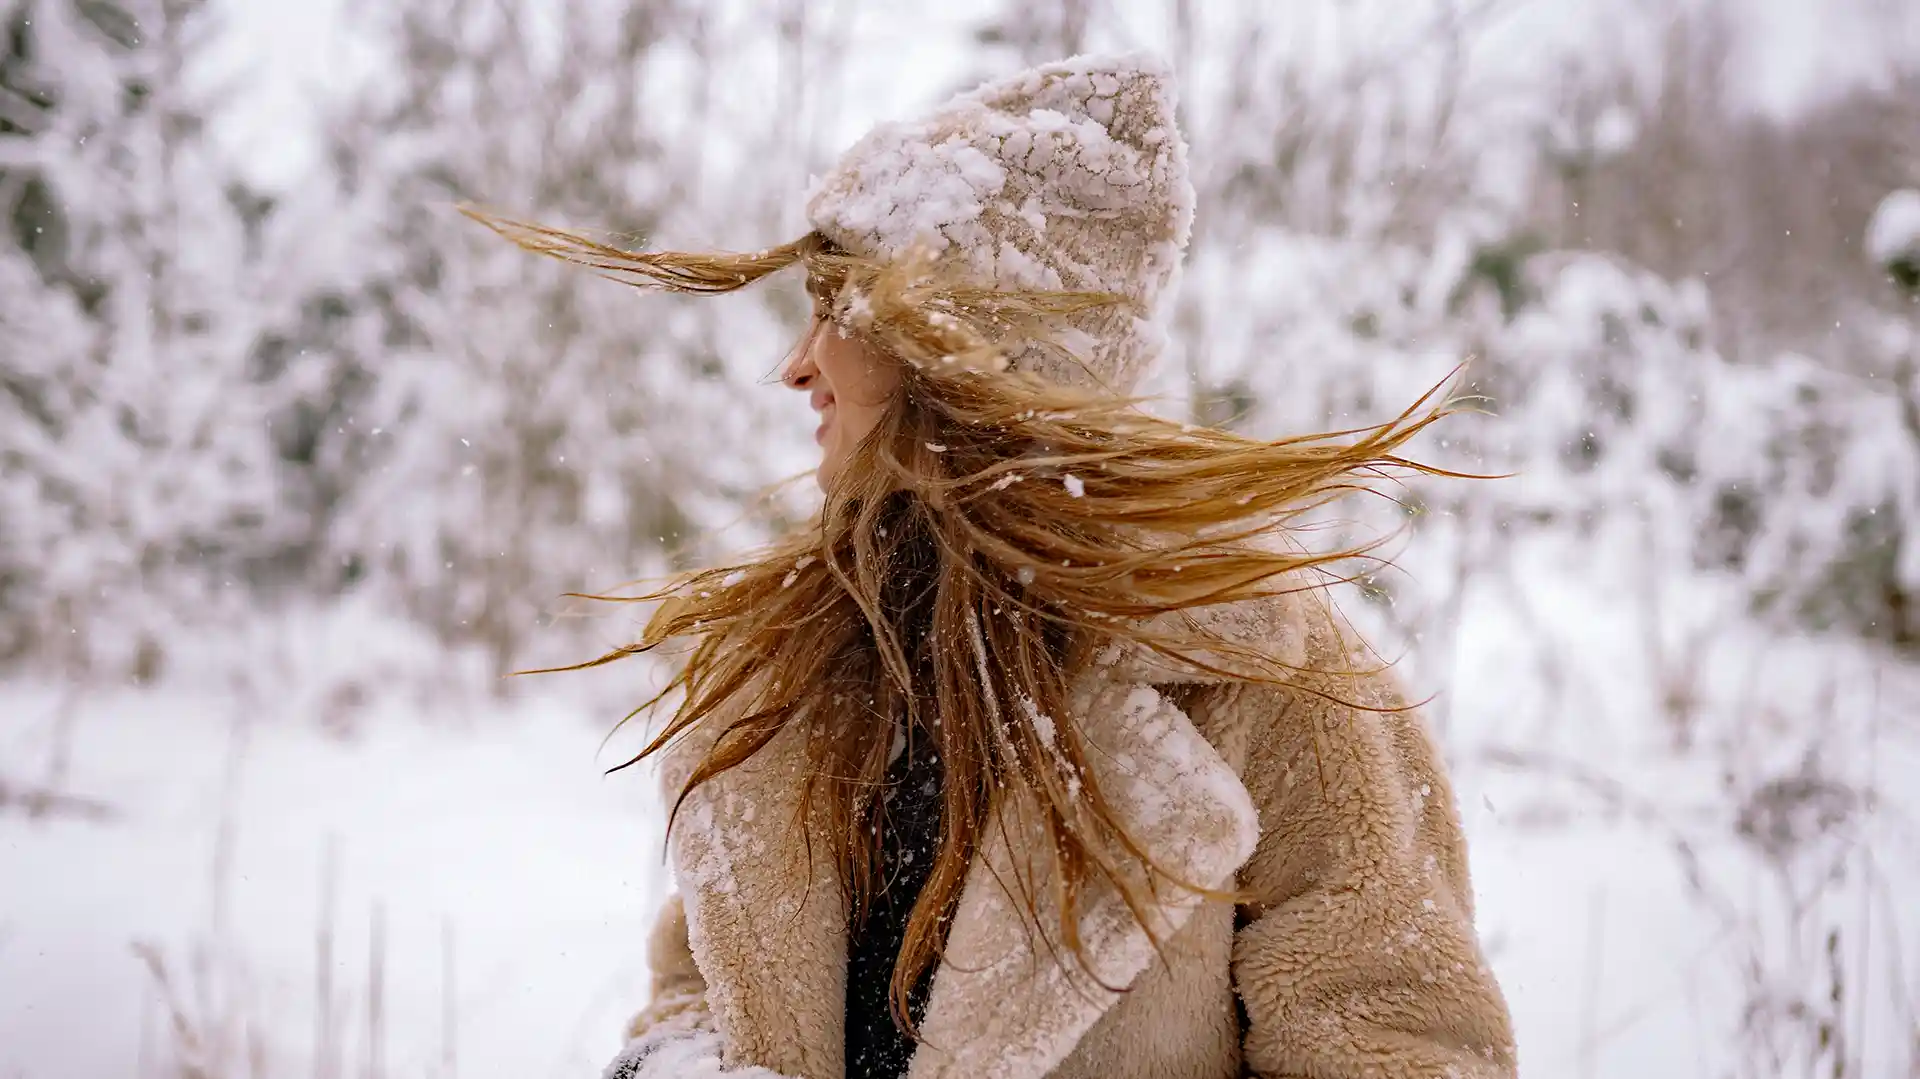 Protecting Your Locks From Winter: The Vegan Way